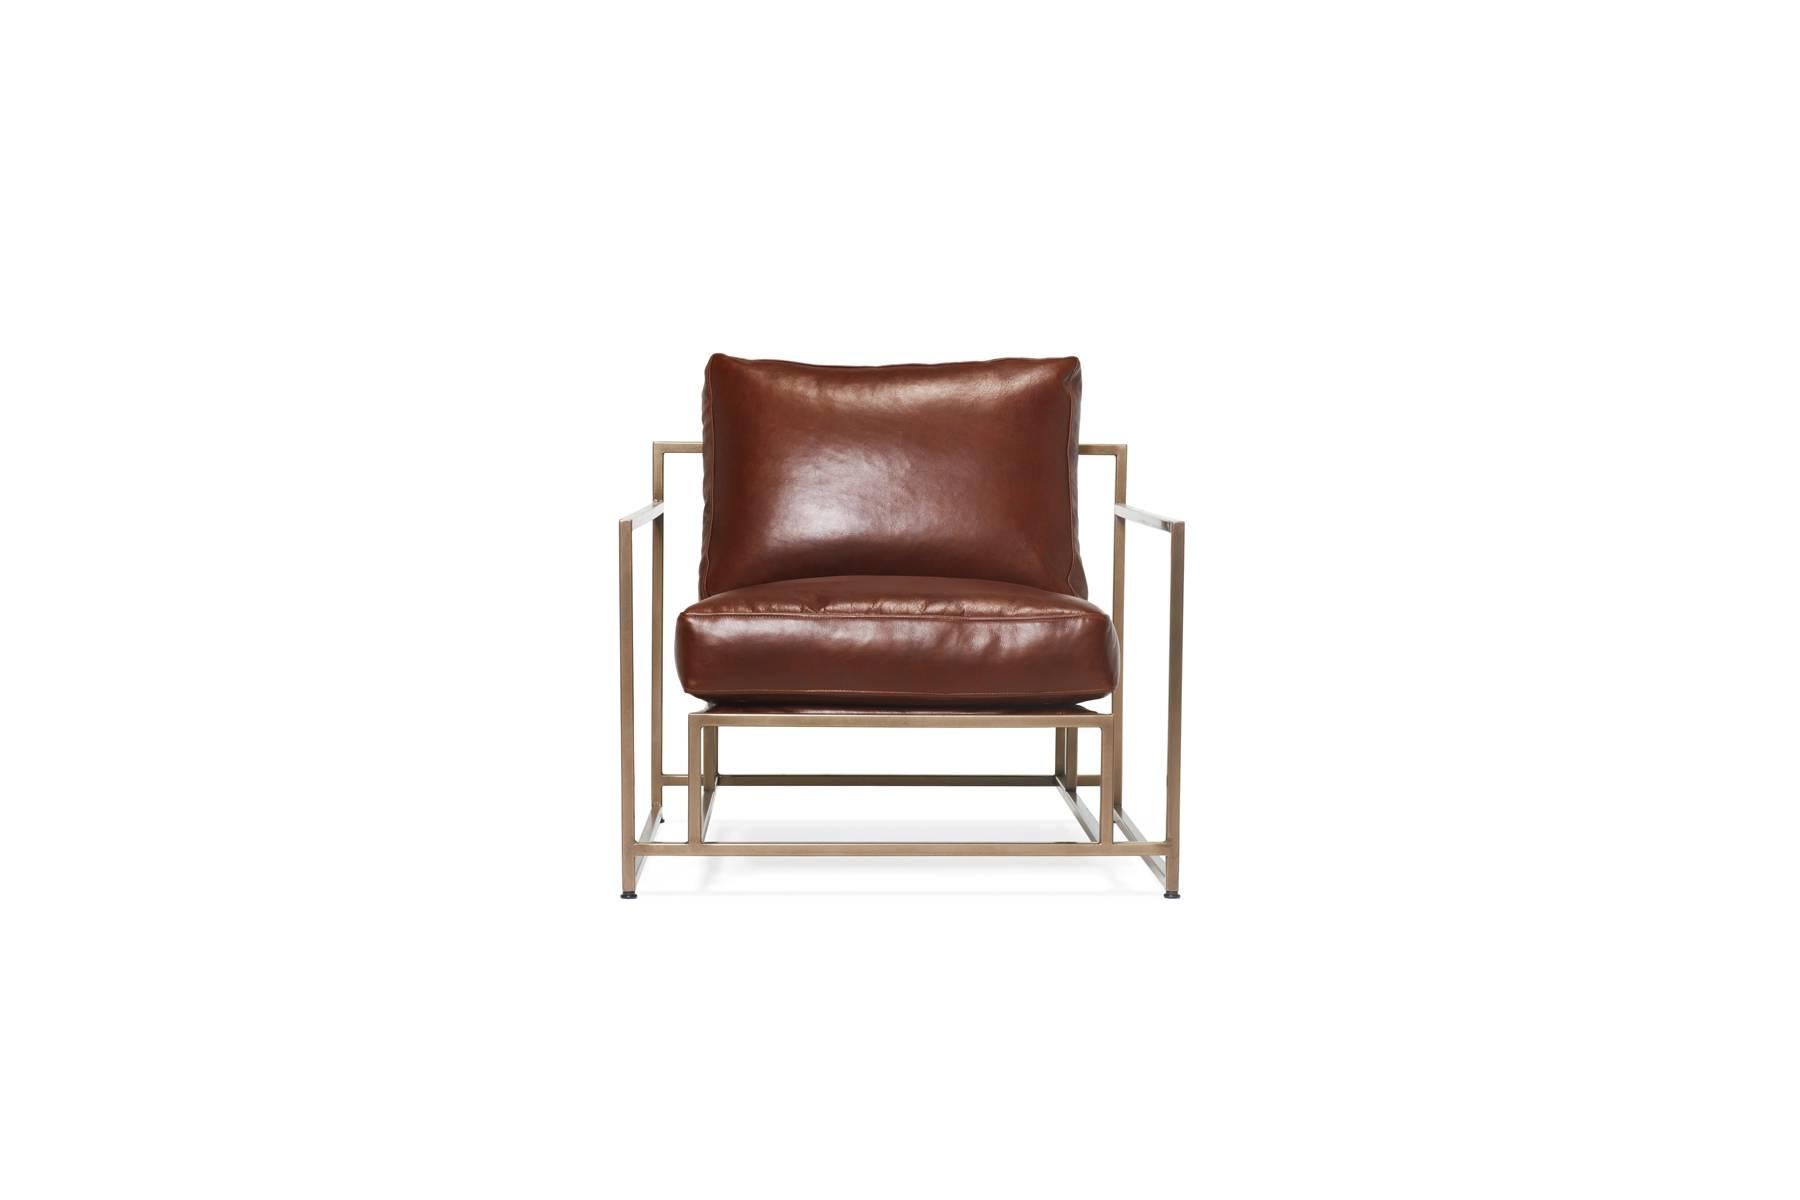 A new chair in our leather series, this version of the Inheritance collection chair has walnut leather upholstery atop an antique brass frame with natural cotton webbing, walnut leather belts and antique brass buckles.

This item is made to order